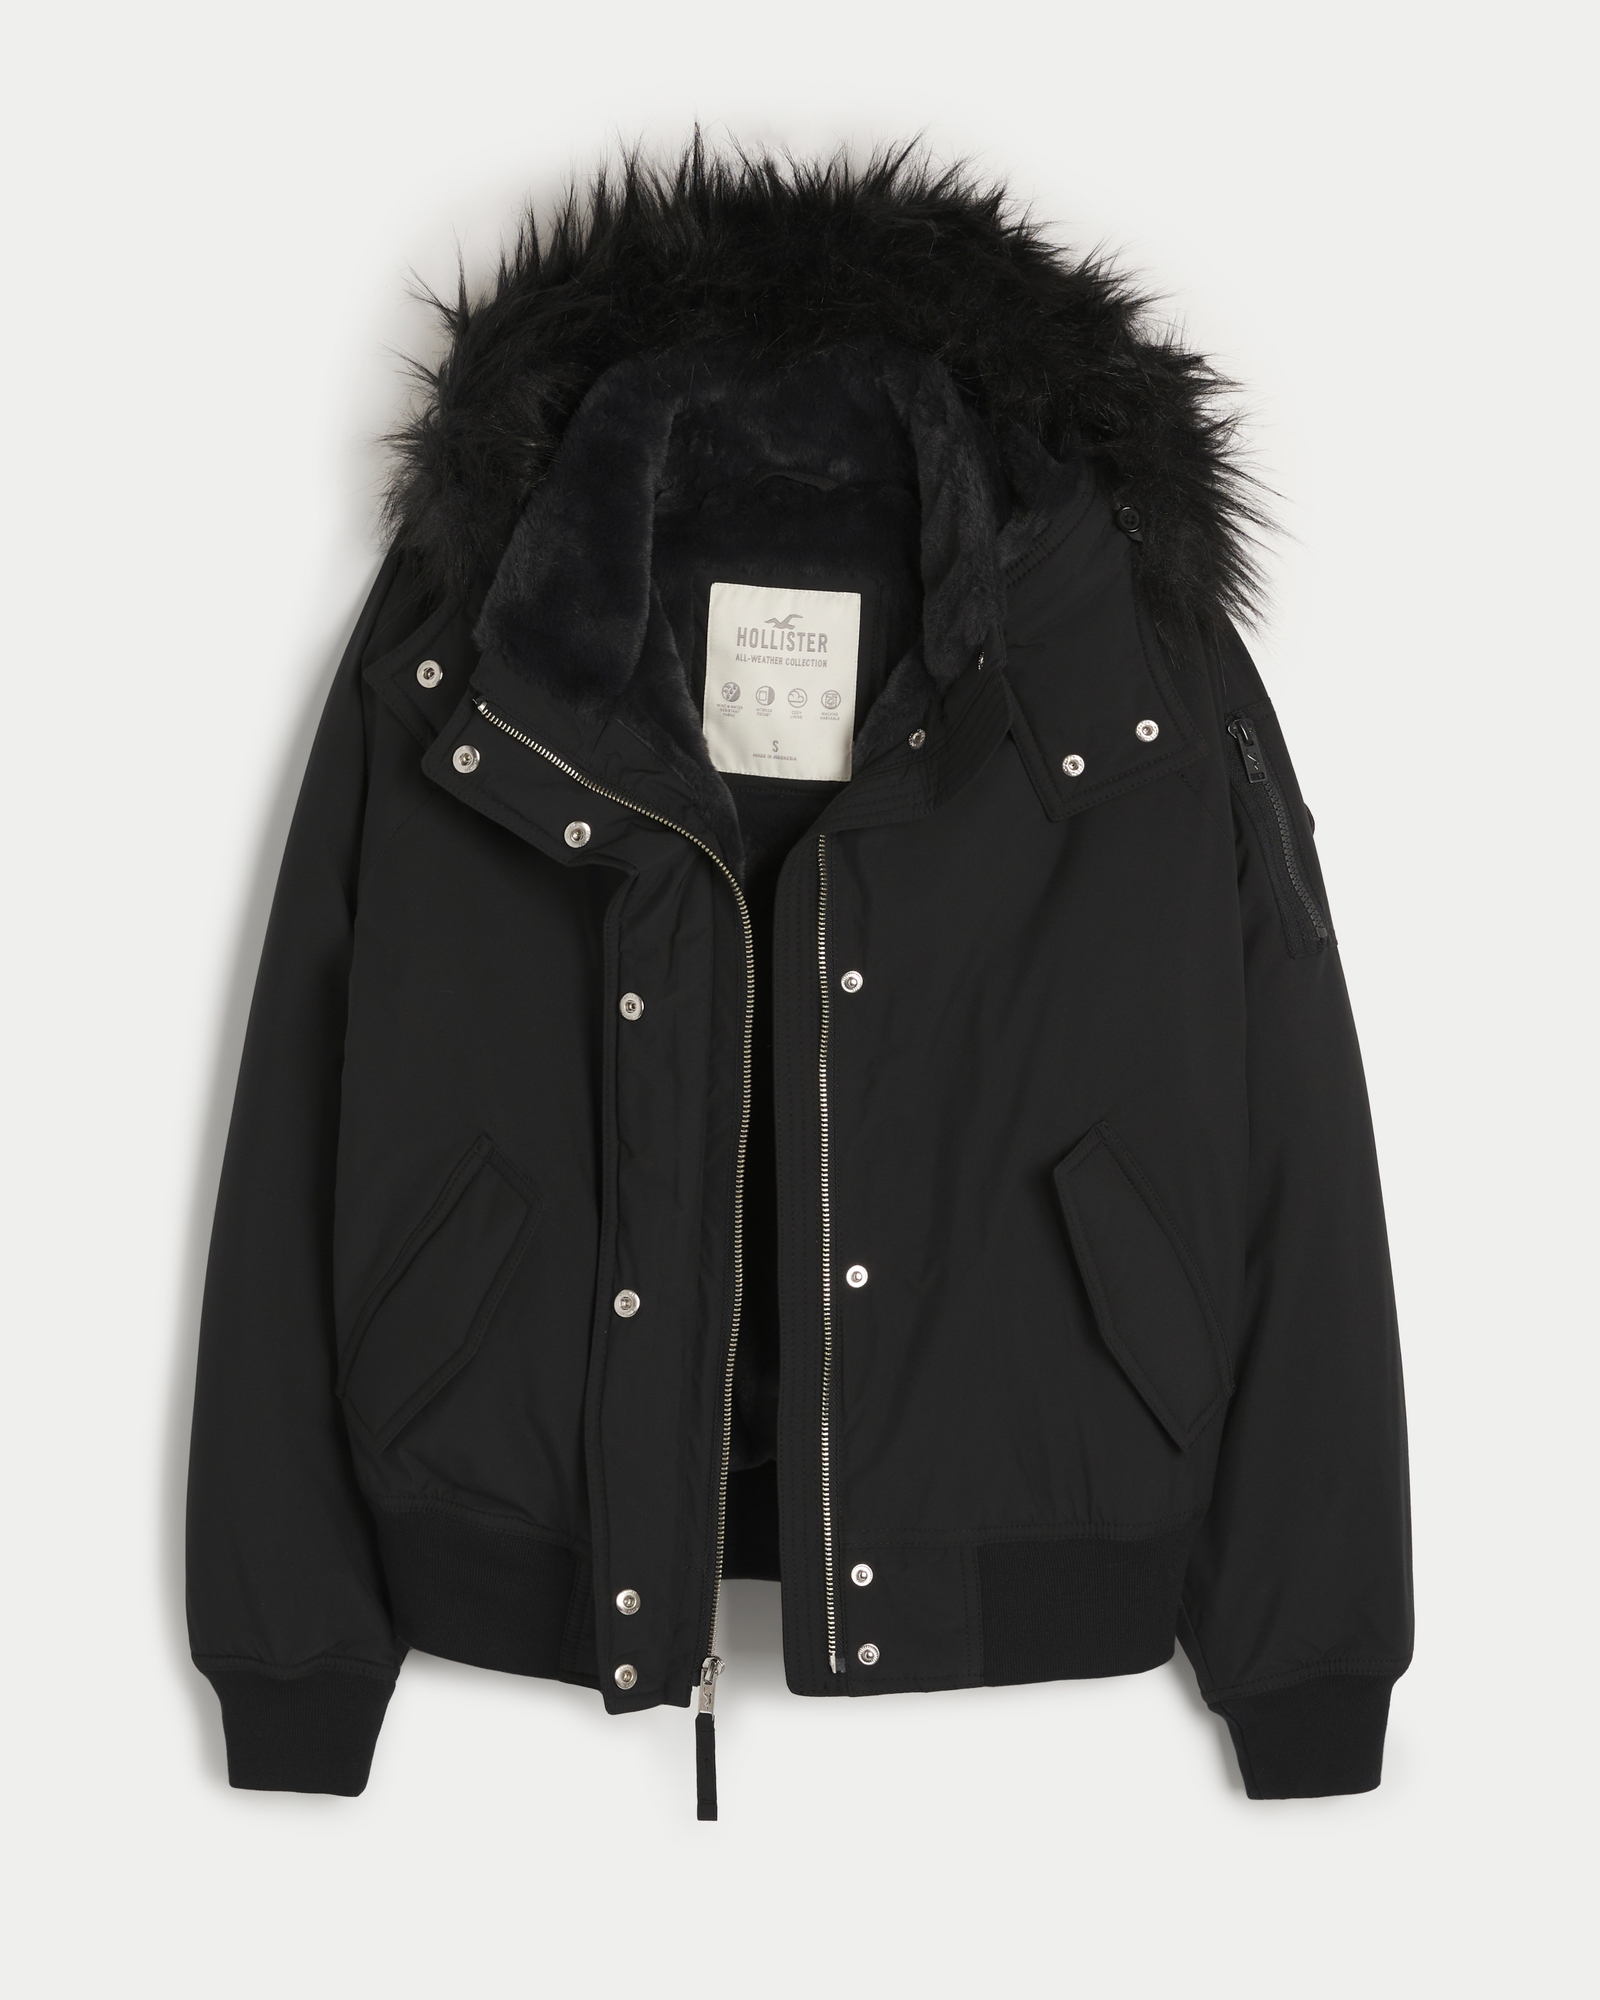 Hollister Faux Fur Lined All Weather Jacket Small Size for Sale in